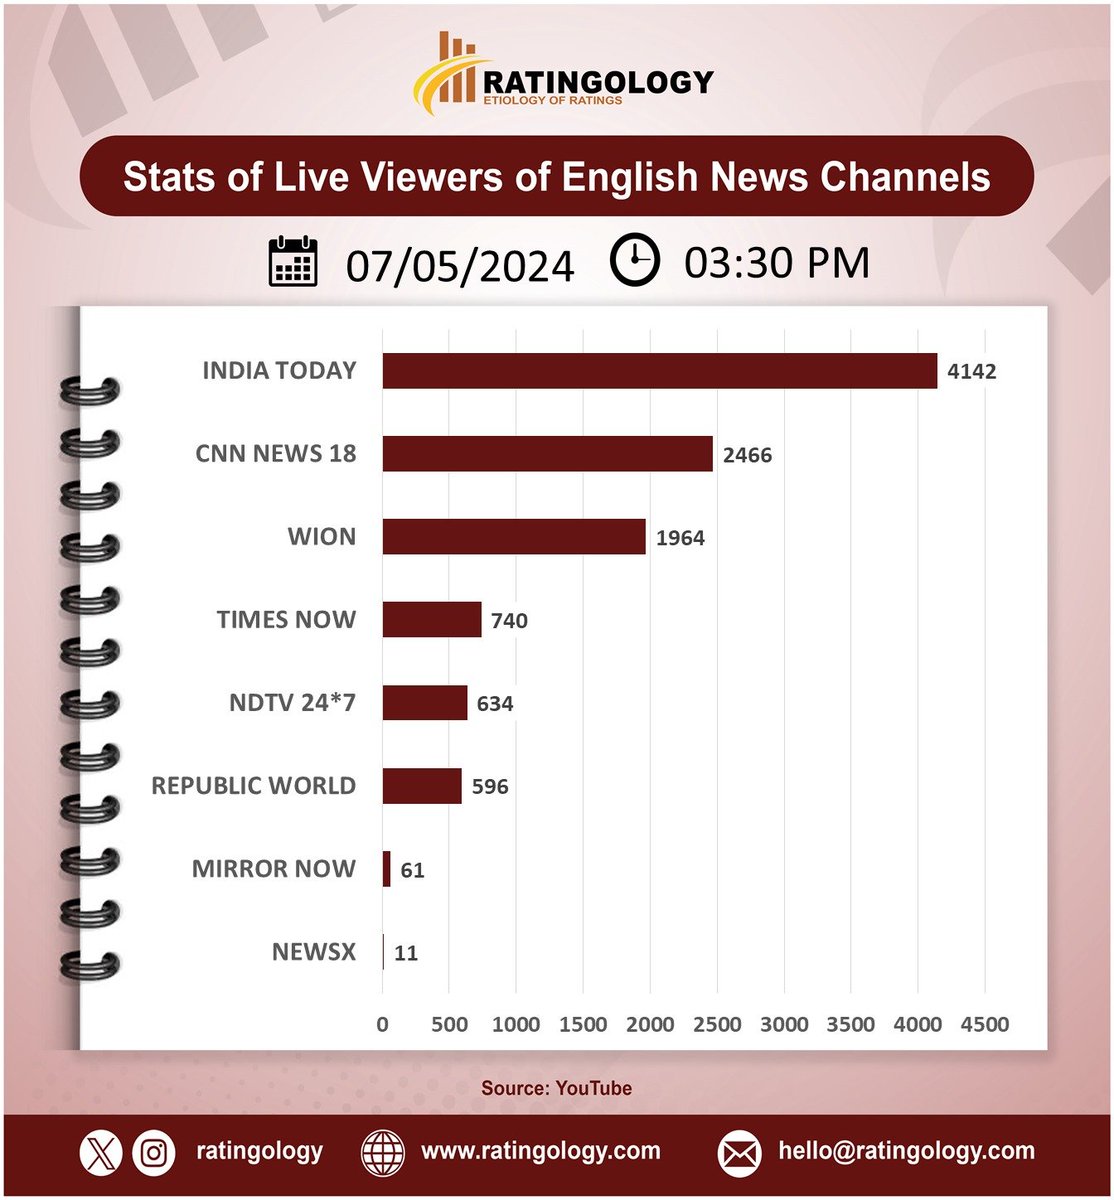 𝐒𝐭𝐚𝐭𝐬 𝐨𝐟 𝐥𝐢𝐯𝐞 𝐯𝐢𝐞𝐰𝐞𝐫𝐬 𝐨𝐧 #Youtube of #EnglishMedia #channelsat 03:30pm, Date: 07/May/2024 #Ratingology #Mediastats #RatingsKaBaap #DataScience #IndiaToday #Wion #RepublicTV #CNNNews18 #TimesNow #NewsX #NDTV24x7 #MirrorNow